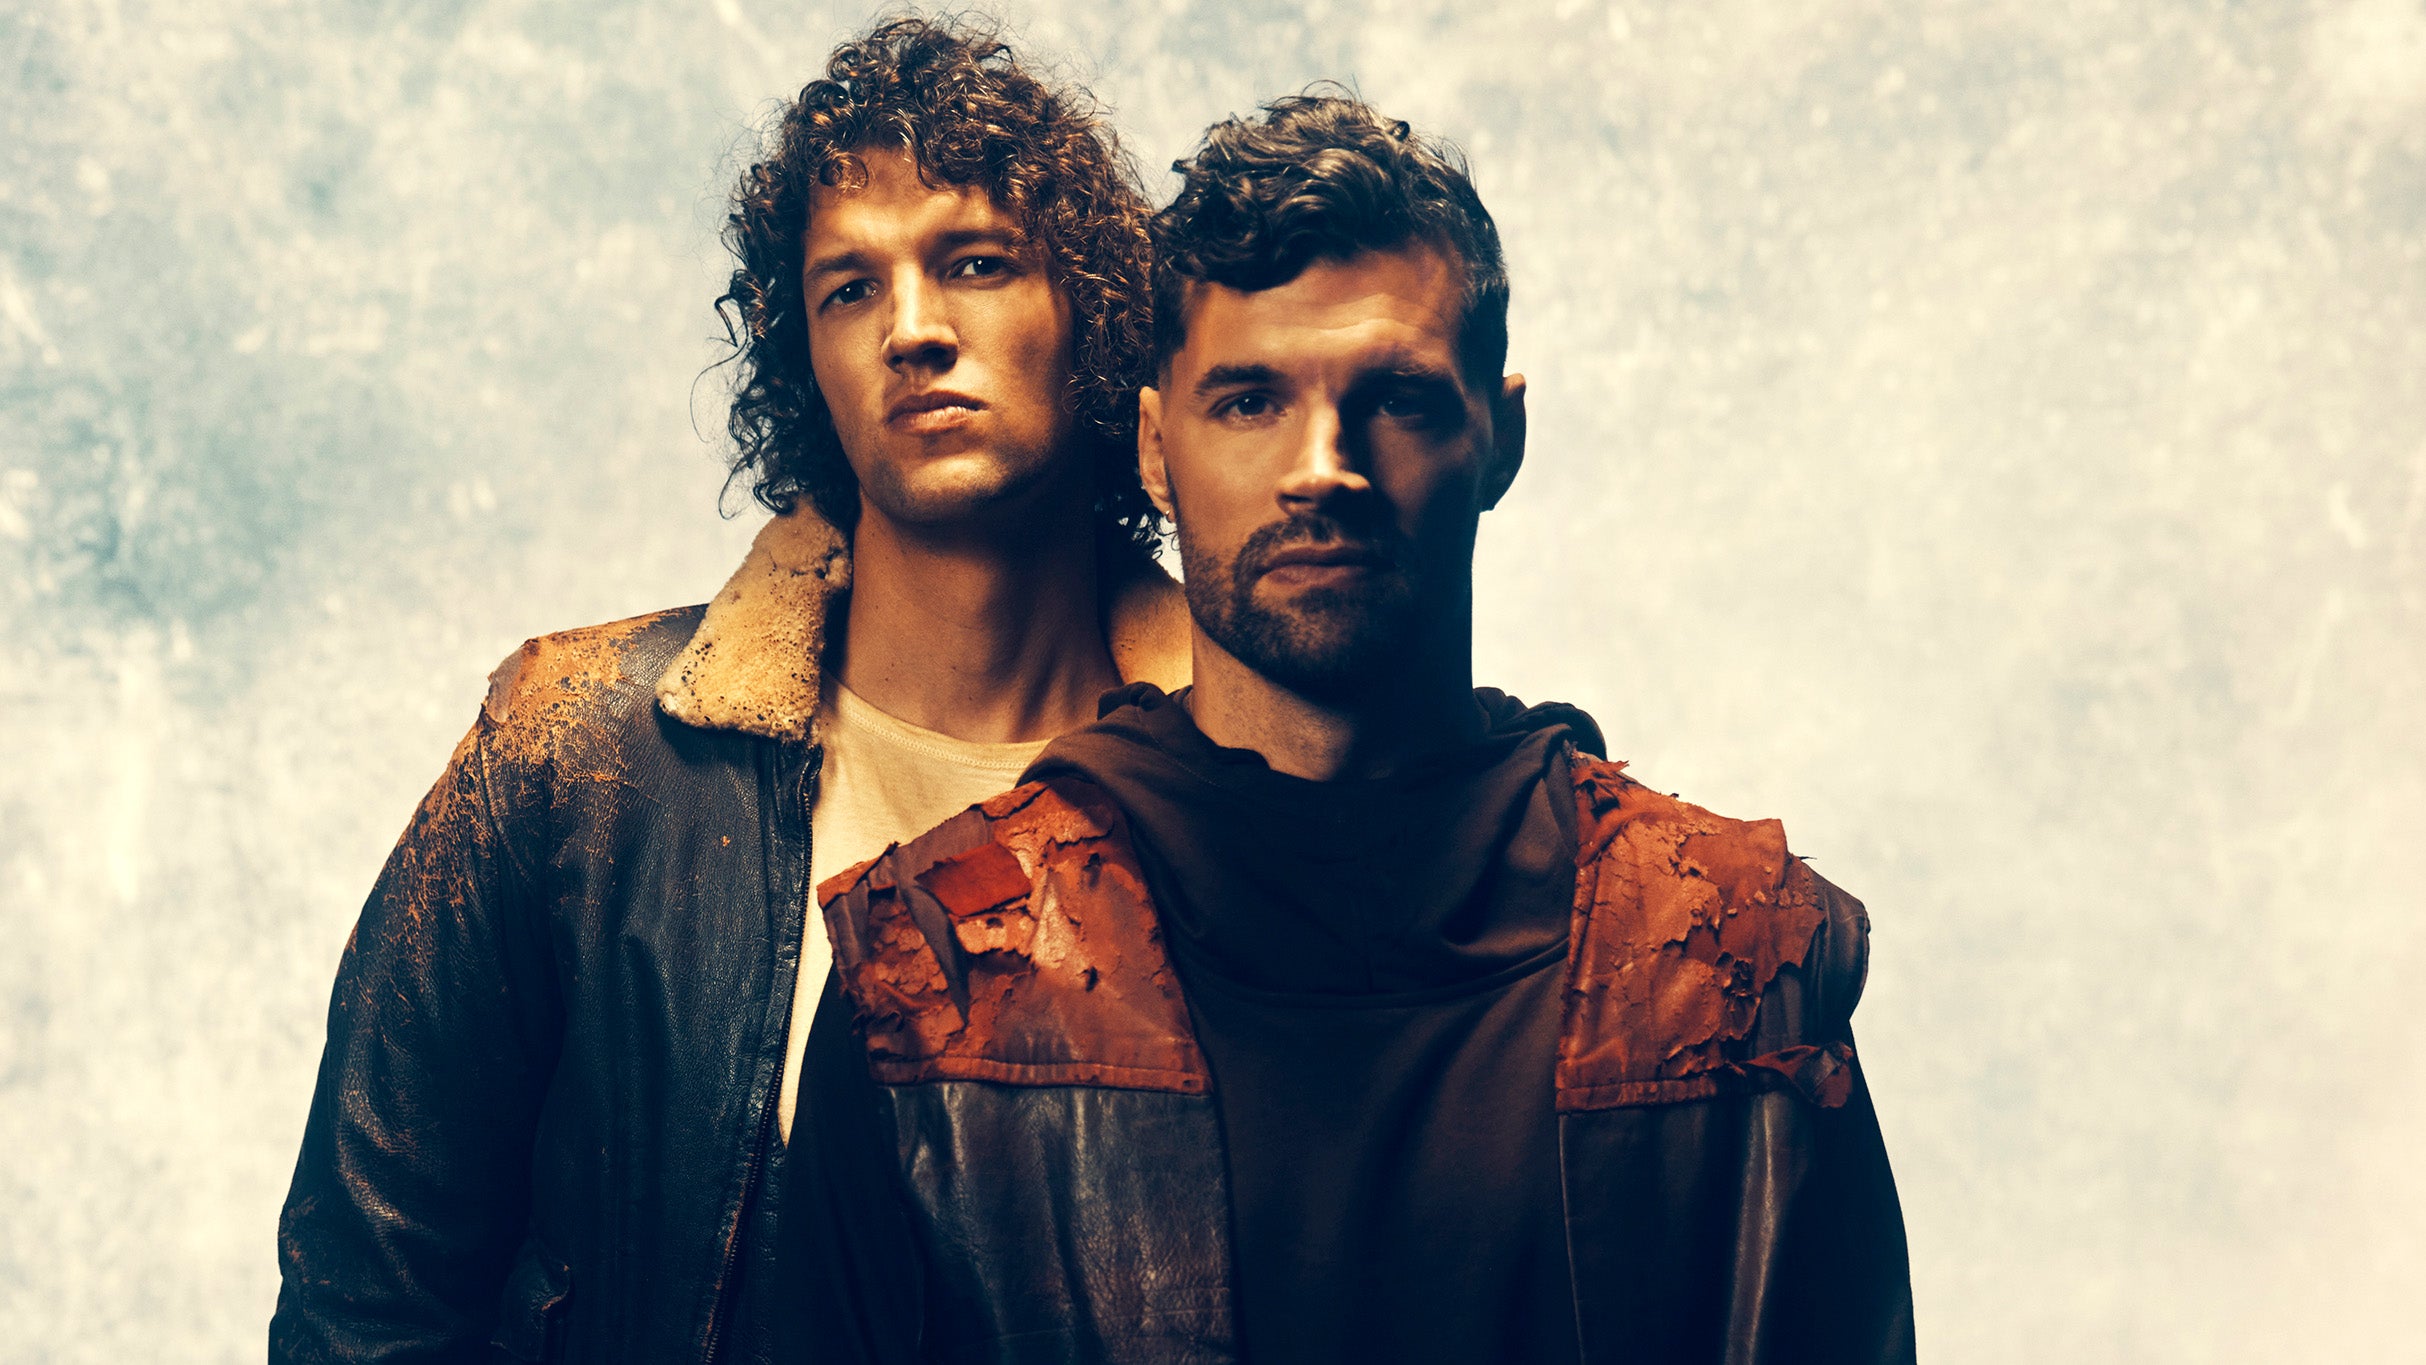 for KING + COUNTRY at United Wireless Arena